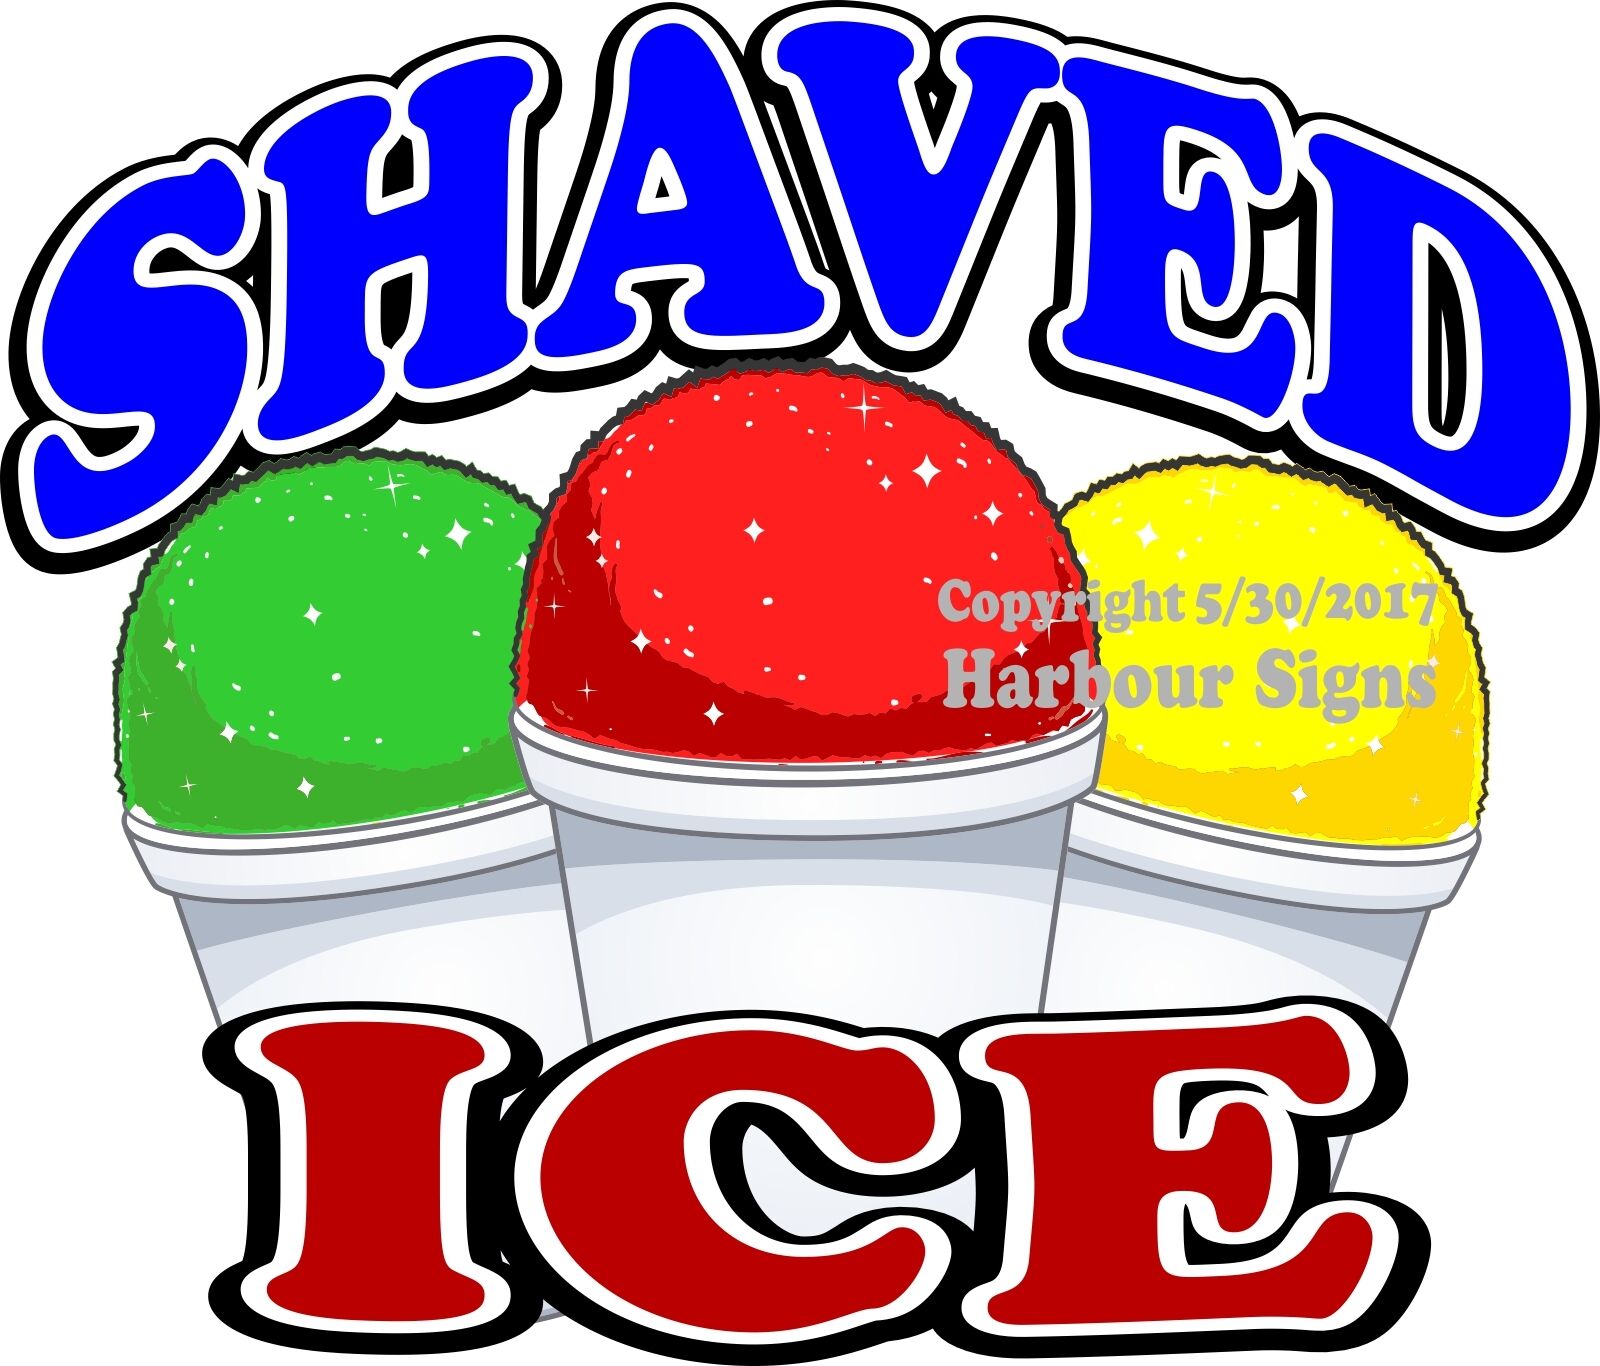 Shaved Ice DECAL (Choose Your Size) Concession Food Truck Sign Sticker 